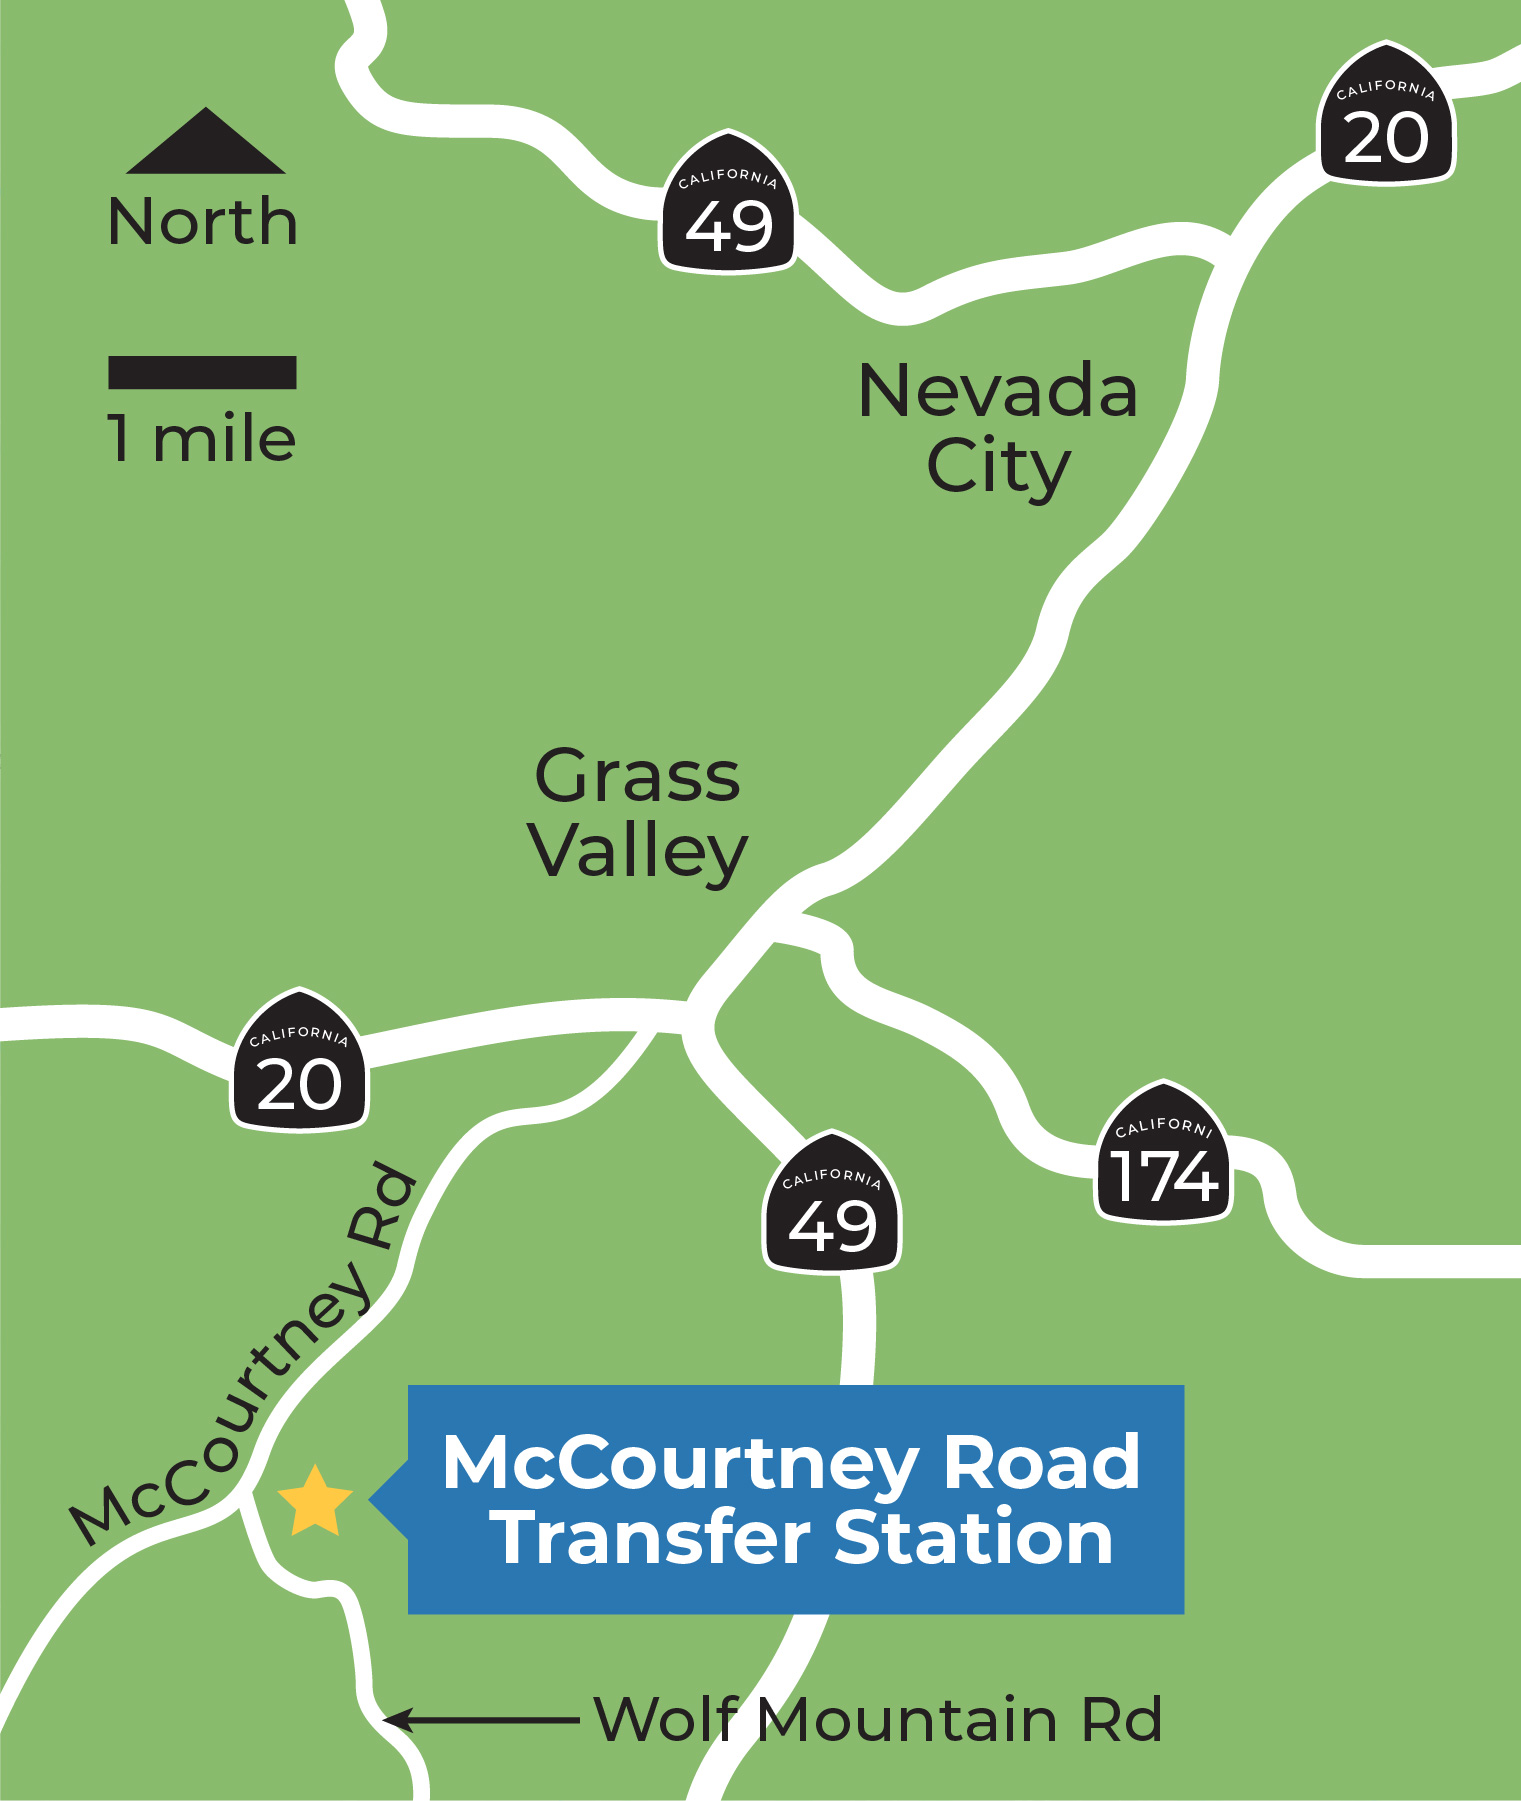 the mrts renovation project is located in nevada county south of nevada city and grass valley. travelling down Interstate 20 the station sits between McCourtney road and wolf mountain road